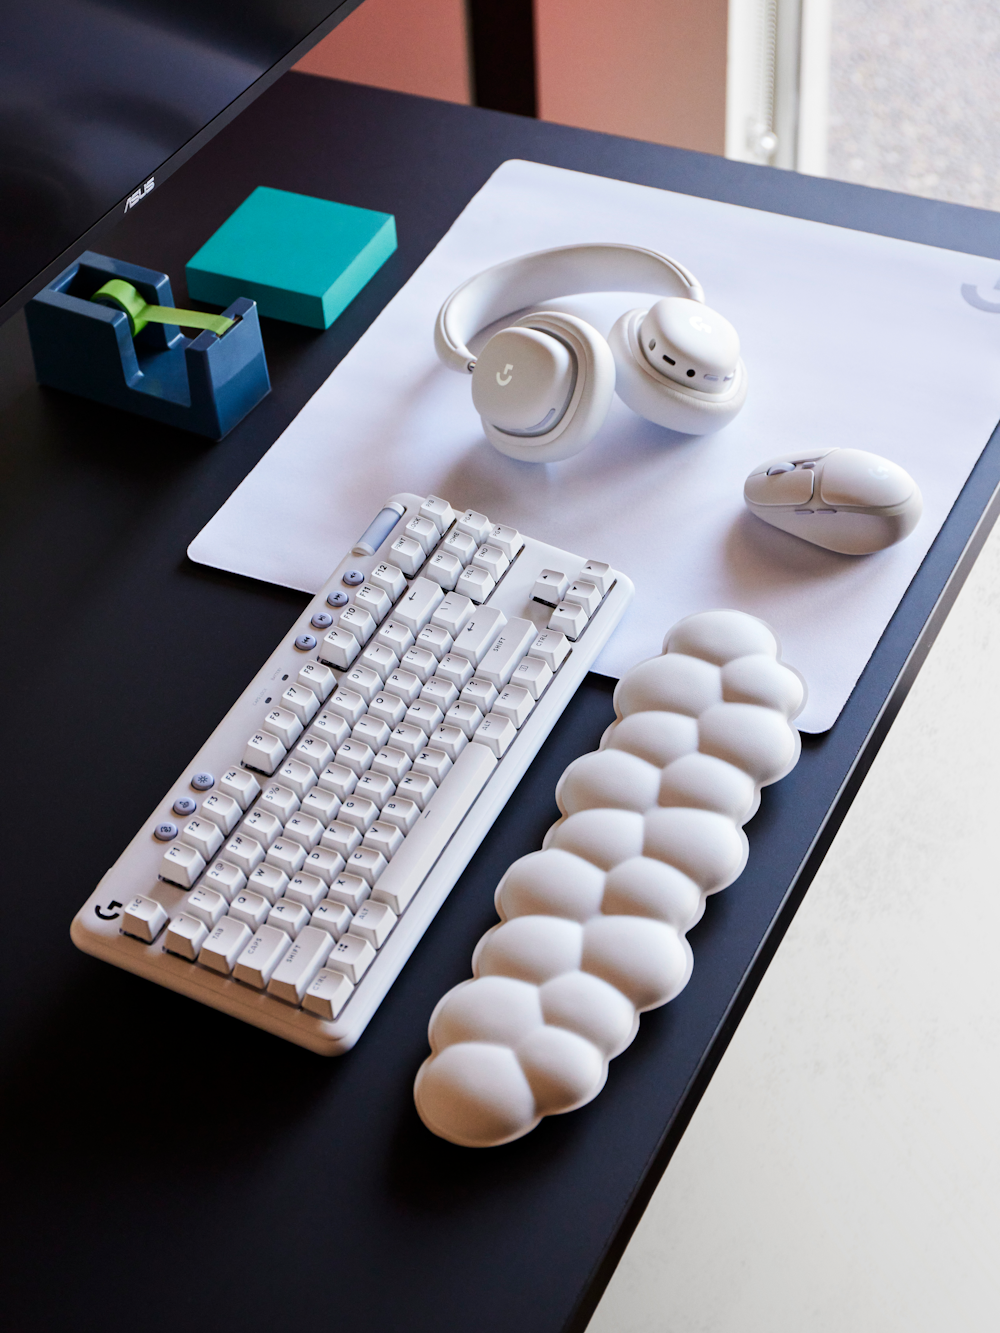 Logitech gaming accessories in white